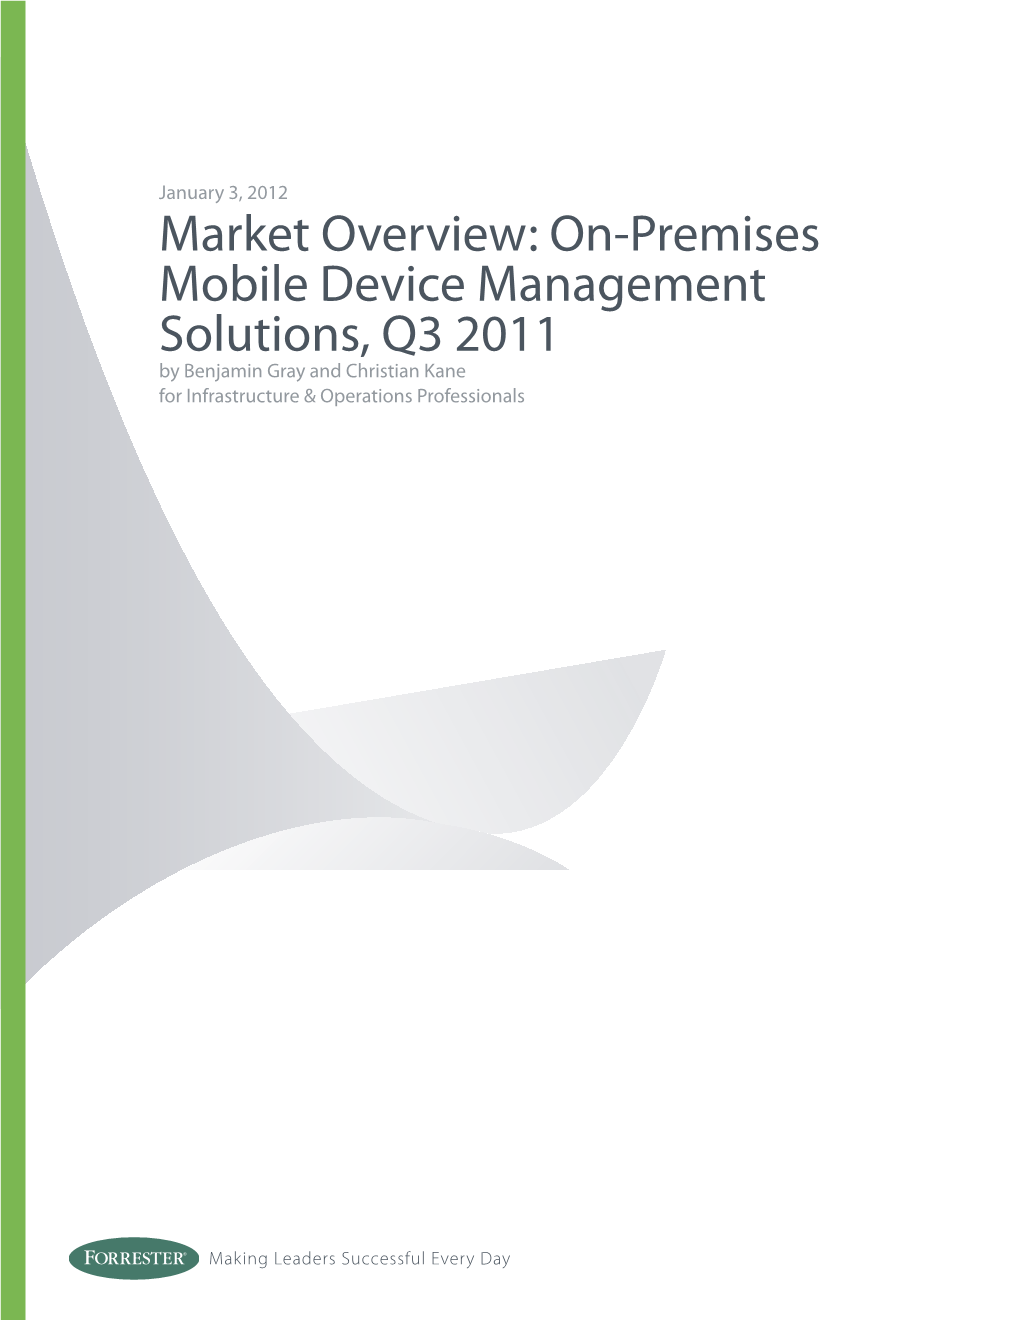 On-Premises Mobile Device Management Solutions, Q3 2011 by Benjamin Gray and Christian Kane for Infrastructure & Operations Professionals